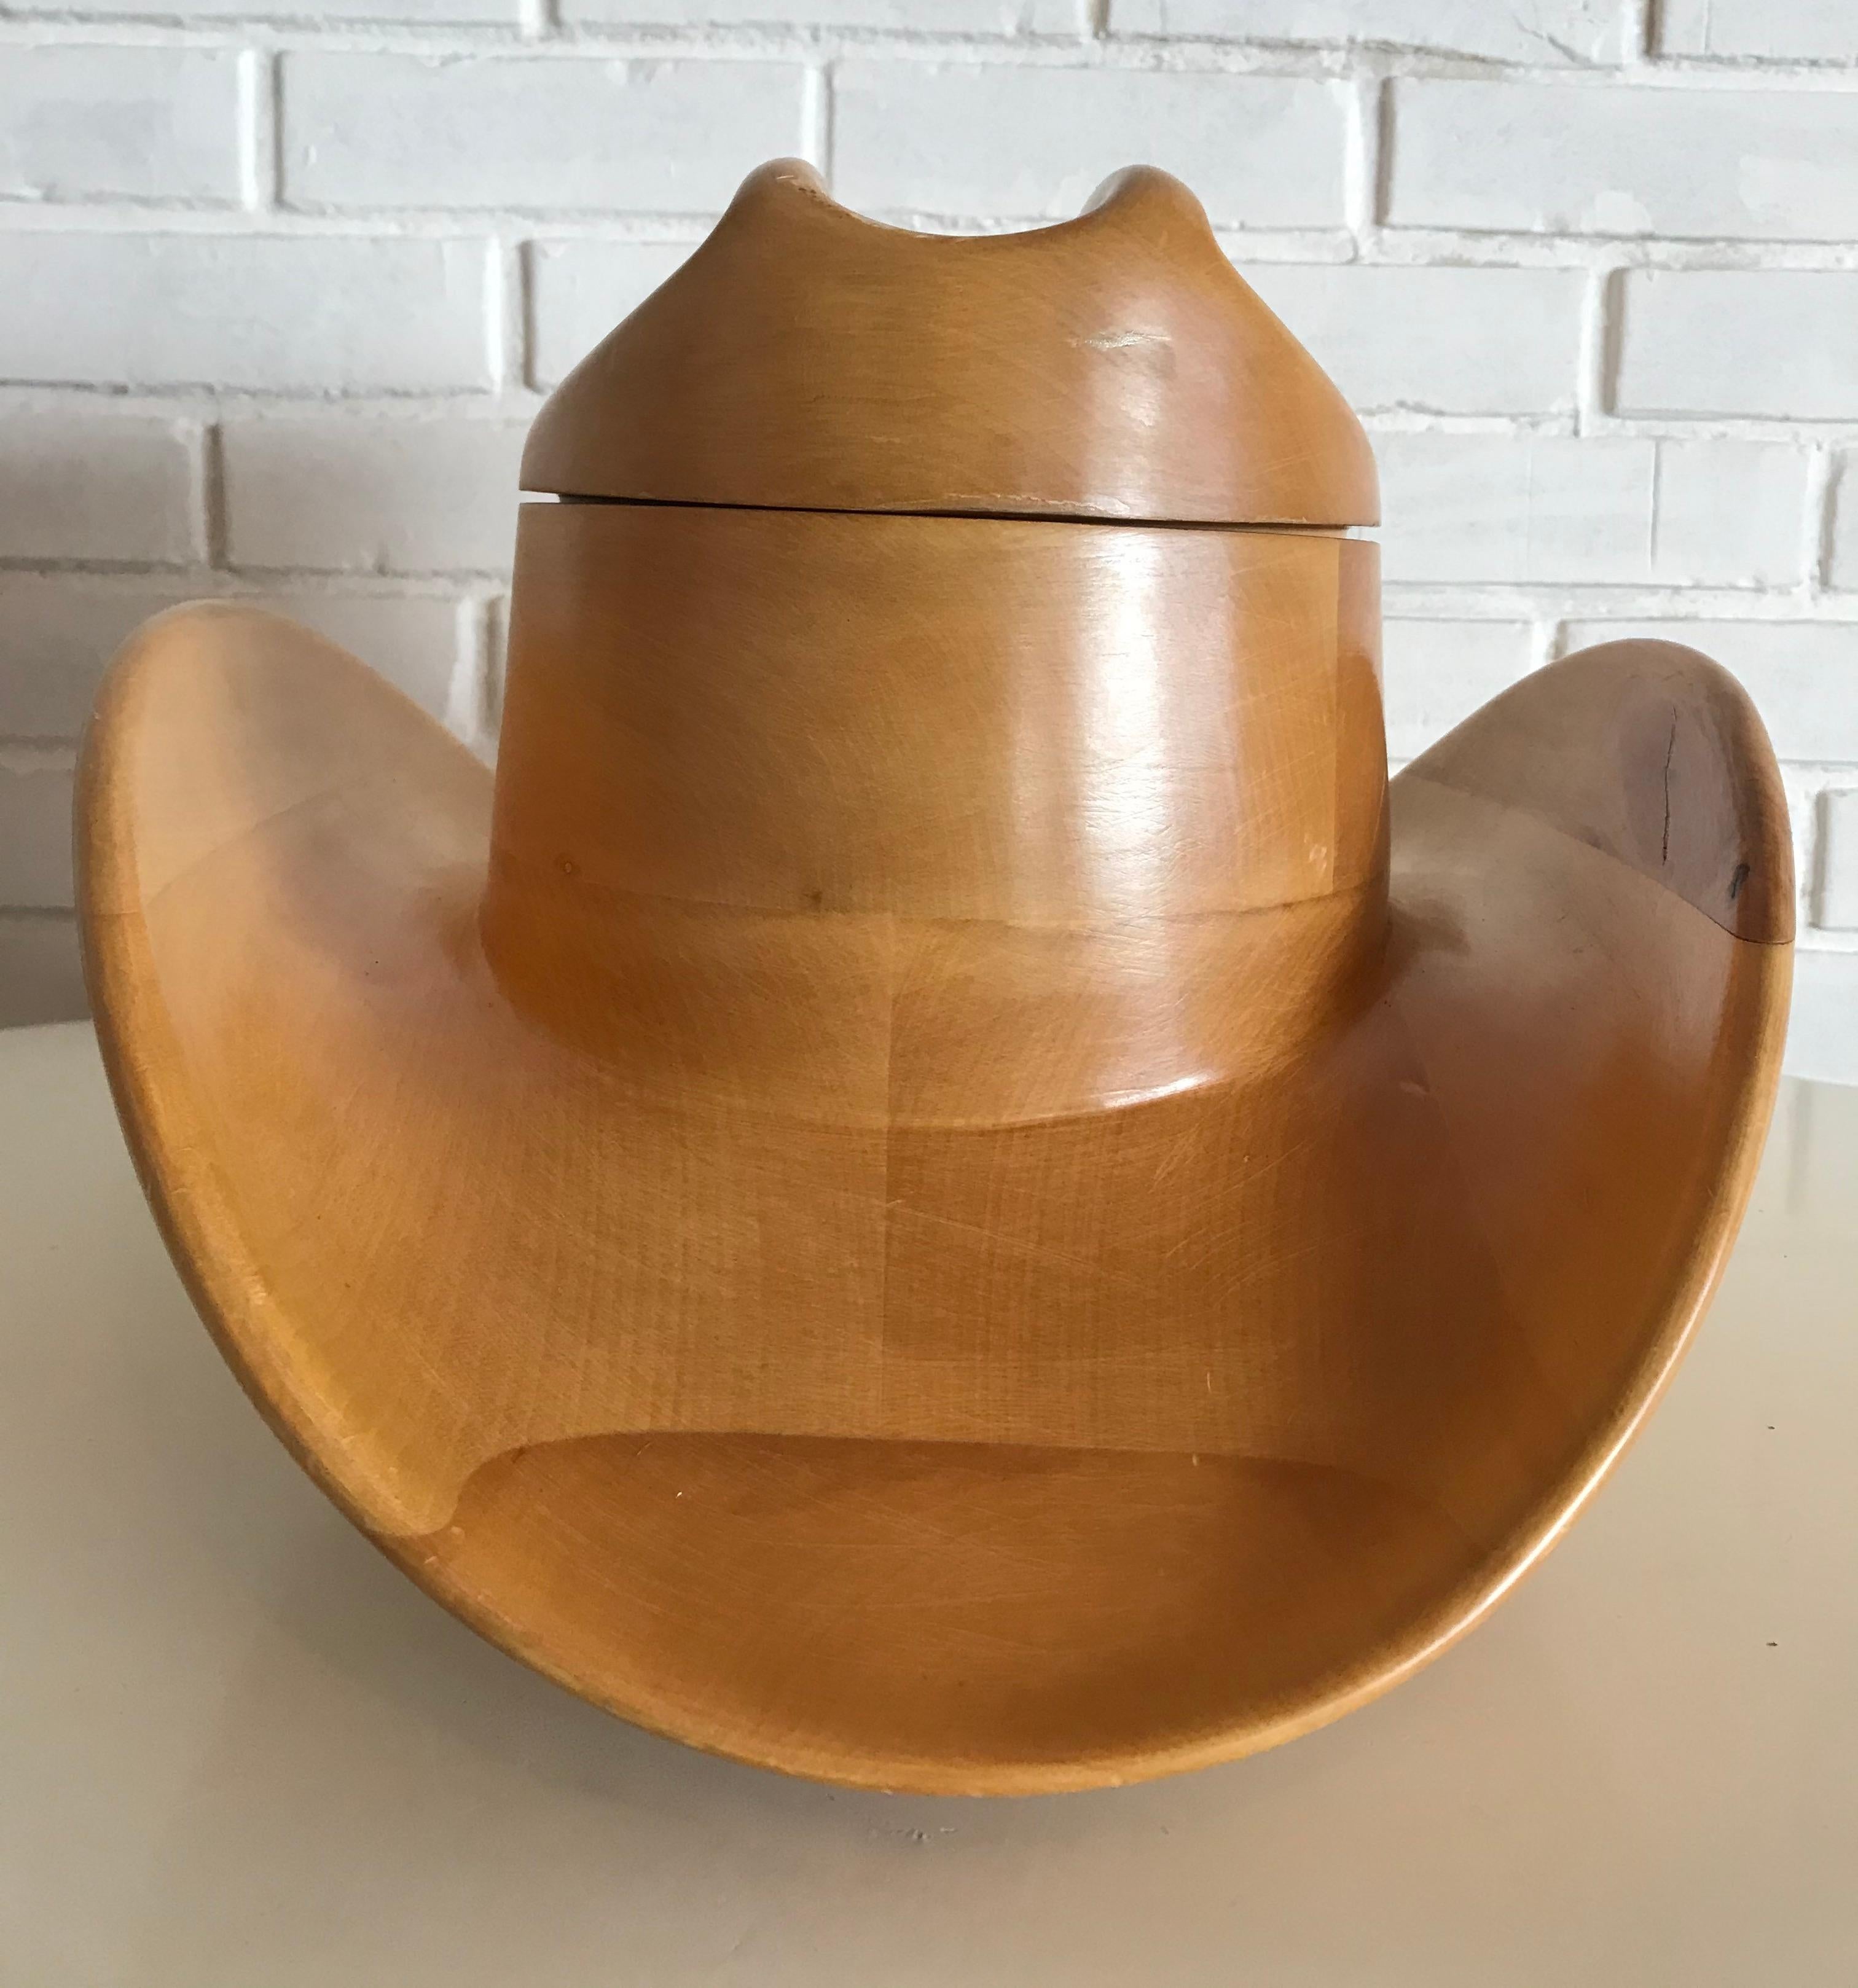 Beautiful wood carved ice bucket cowboy hat made by Alfonso Bini Firenze (Venice), Italy.
The BINI logo is marked at the bottom of the ice bucket hat. x.

 